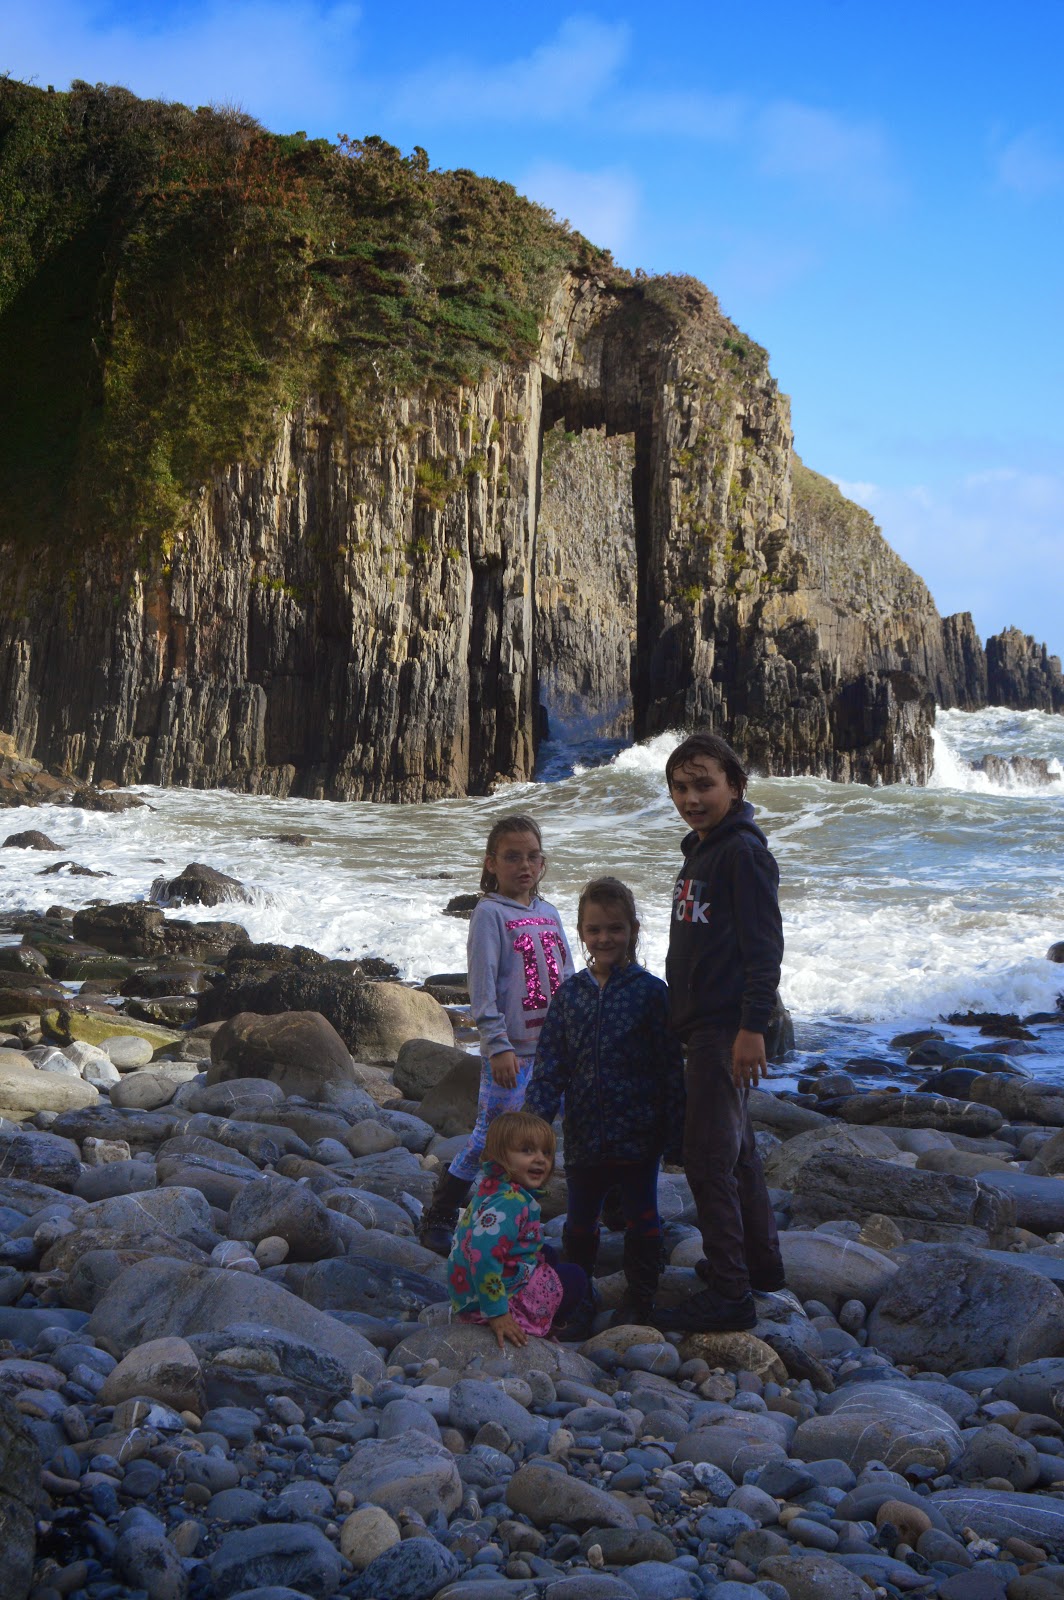 , Church Doors Cove, Pembrokeshire and a Fear of Heights #countrykids